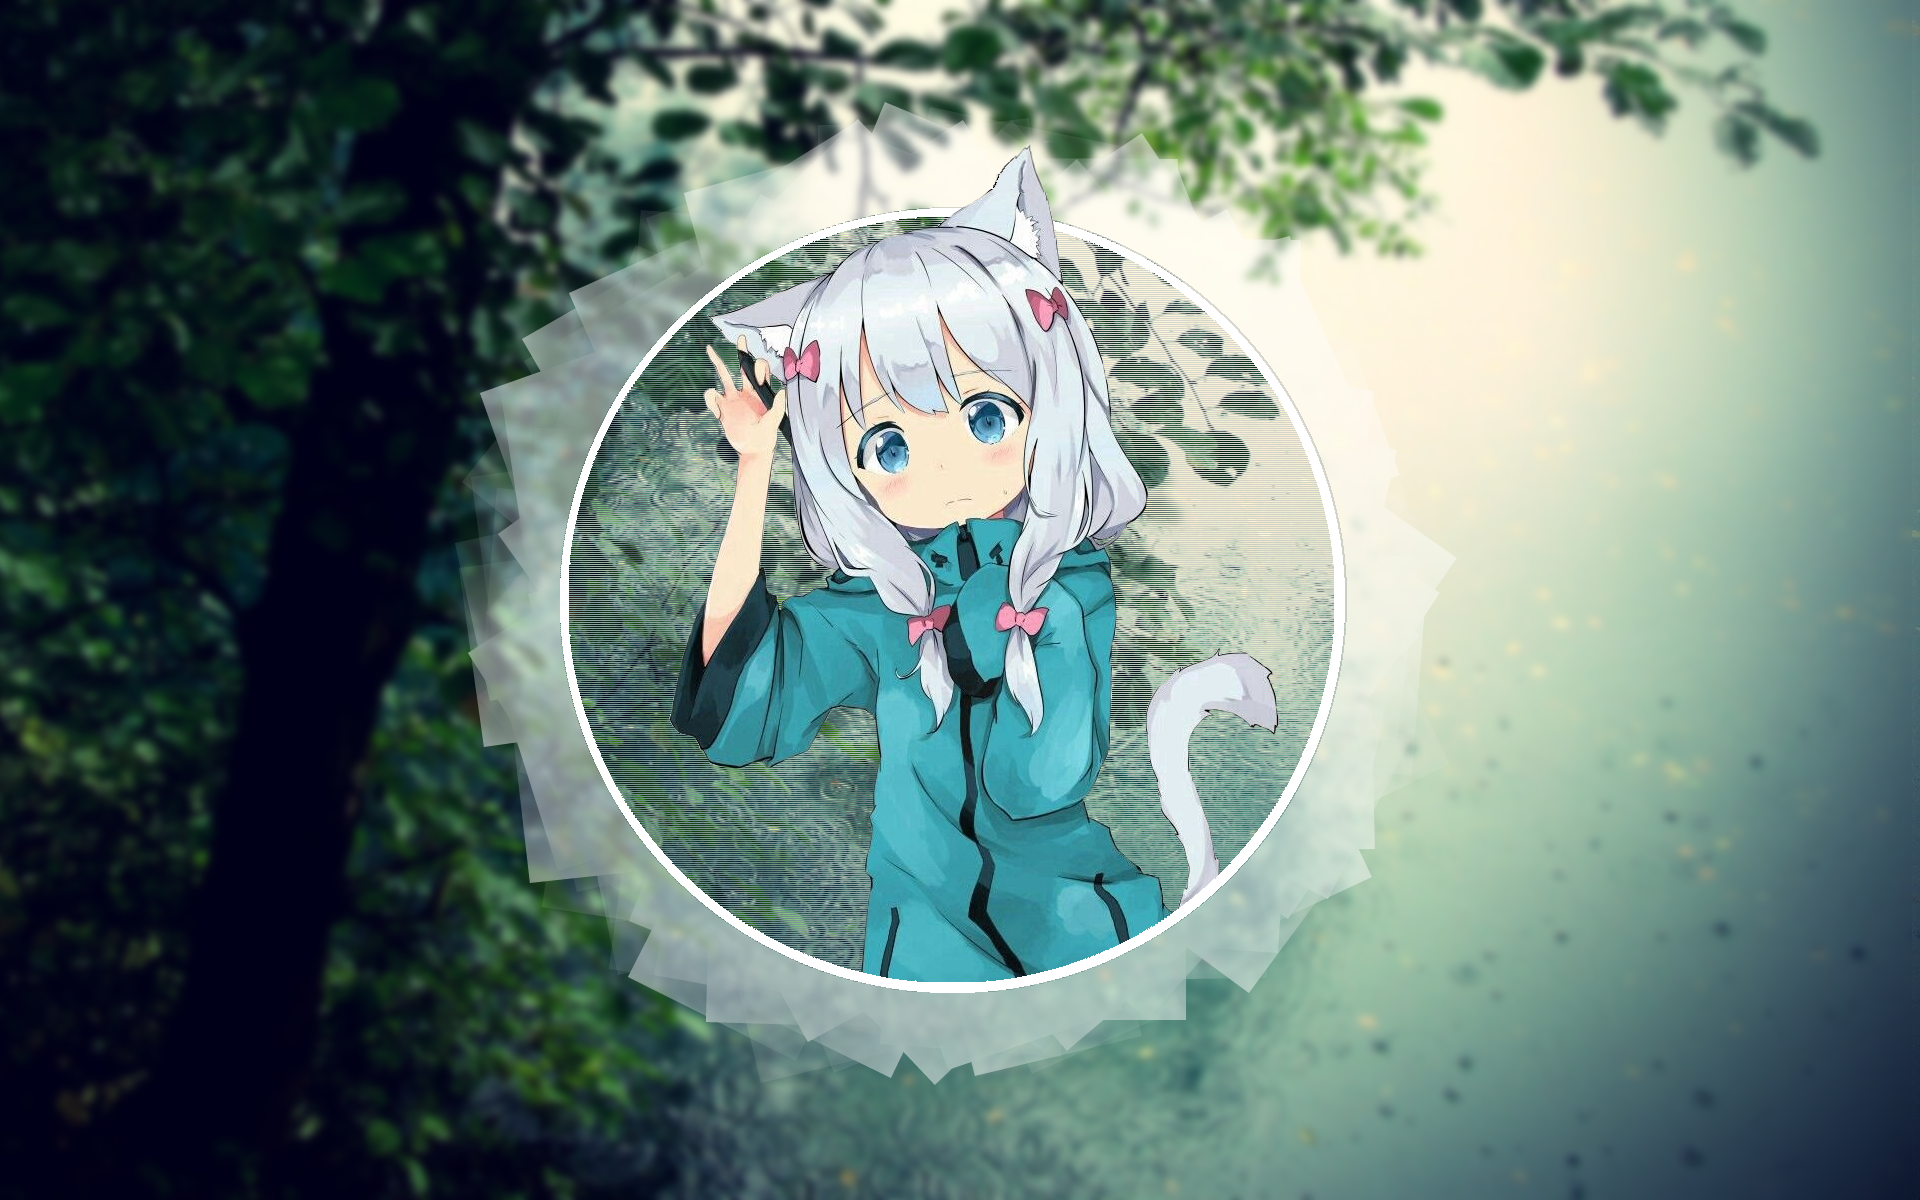 Anime 1920x1200 anime anime girls picture-in-picture Izumi Sagiri cat girl fan art blurred blue eyes pale forest landscape white hair